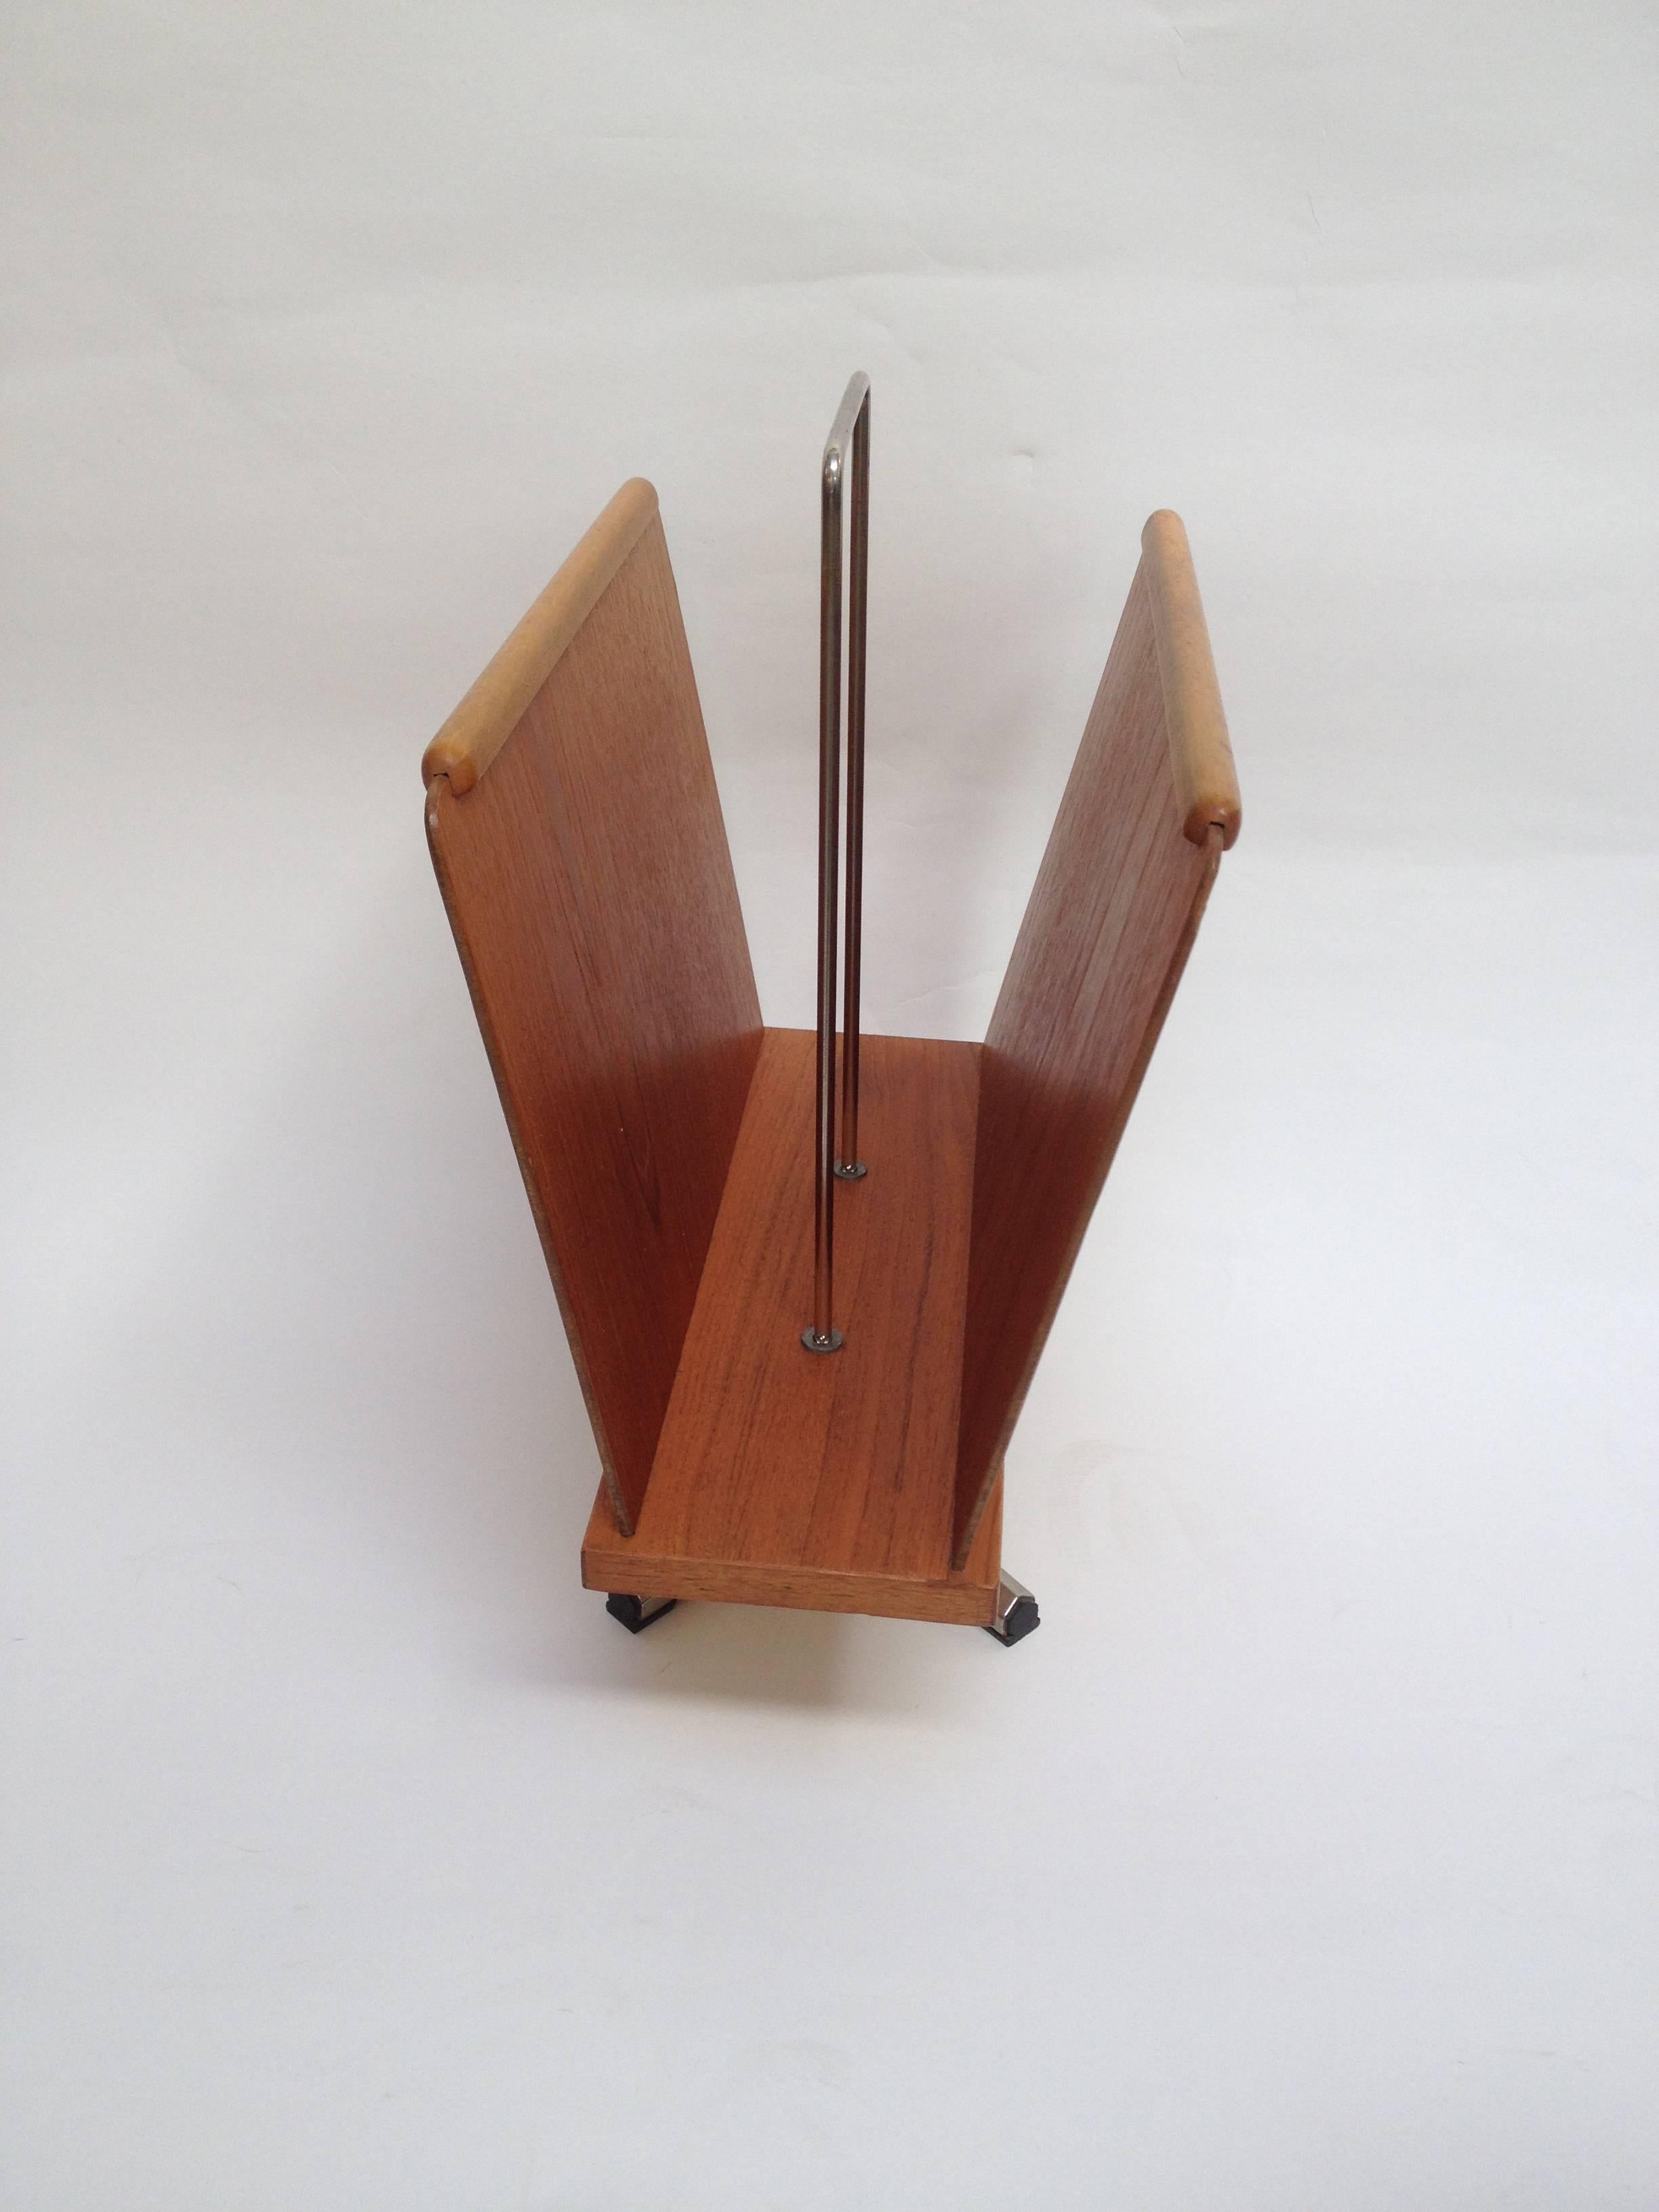 Mid-Century Modern Teak Swivel Magazine Rack, Made in Norway In Good Condition For Sale In Victoria, British Columbia